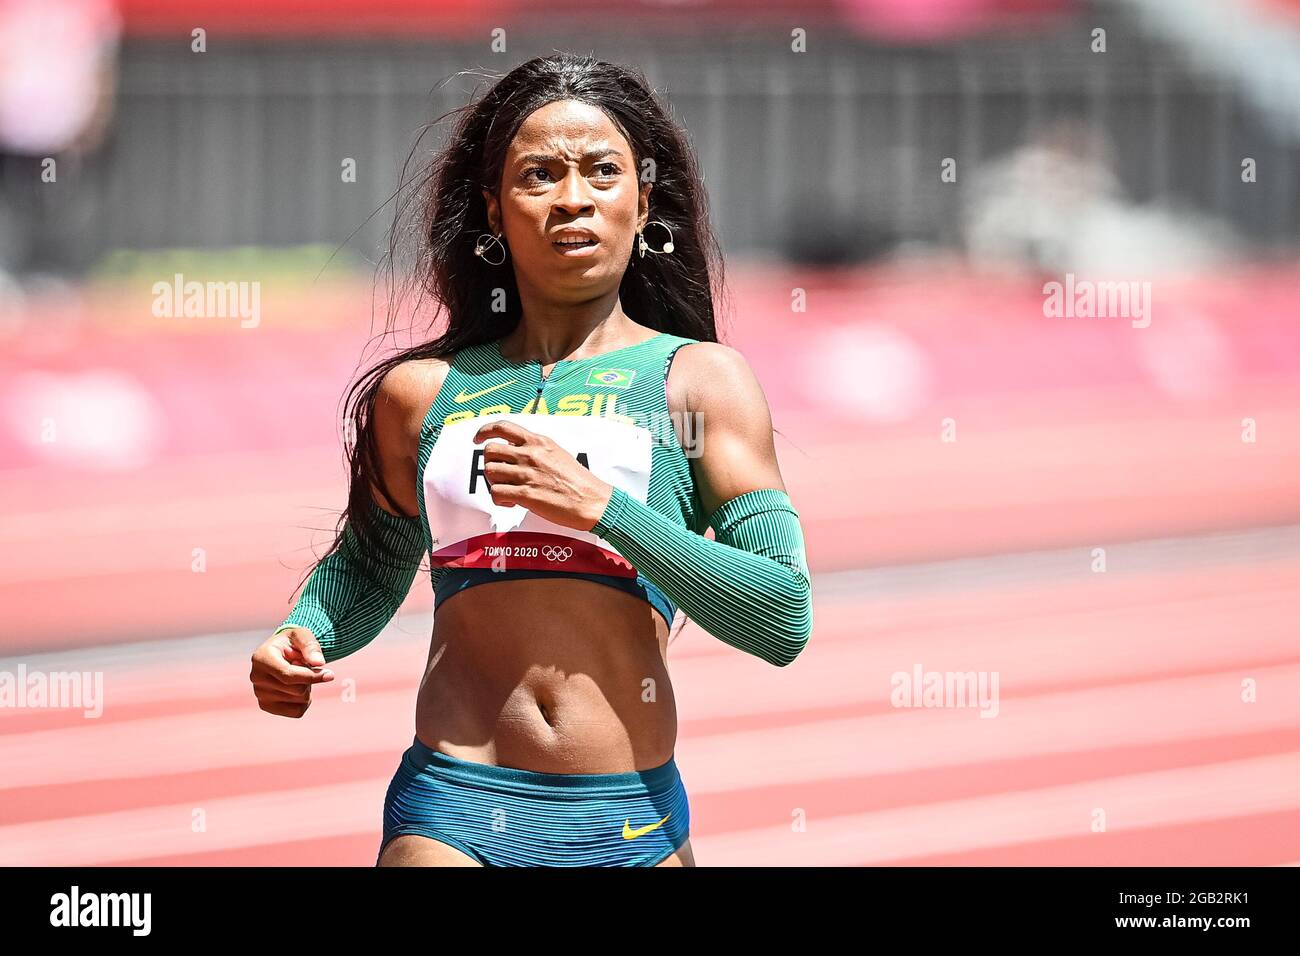 Tokyo, Japan. 02nd Aug, 2021. TOKYO, JAPAN - AUGUST 2: Vitoria Cristina Rosa  of Brasil competing on Women's 200m Round 1 during the Tokyo 2020 Olympic  Games at the Olympic Stadium on